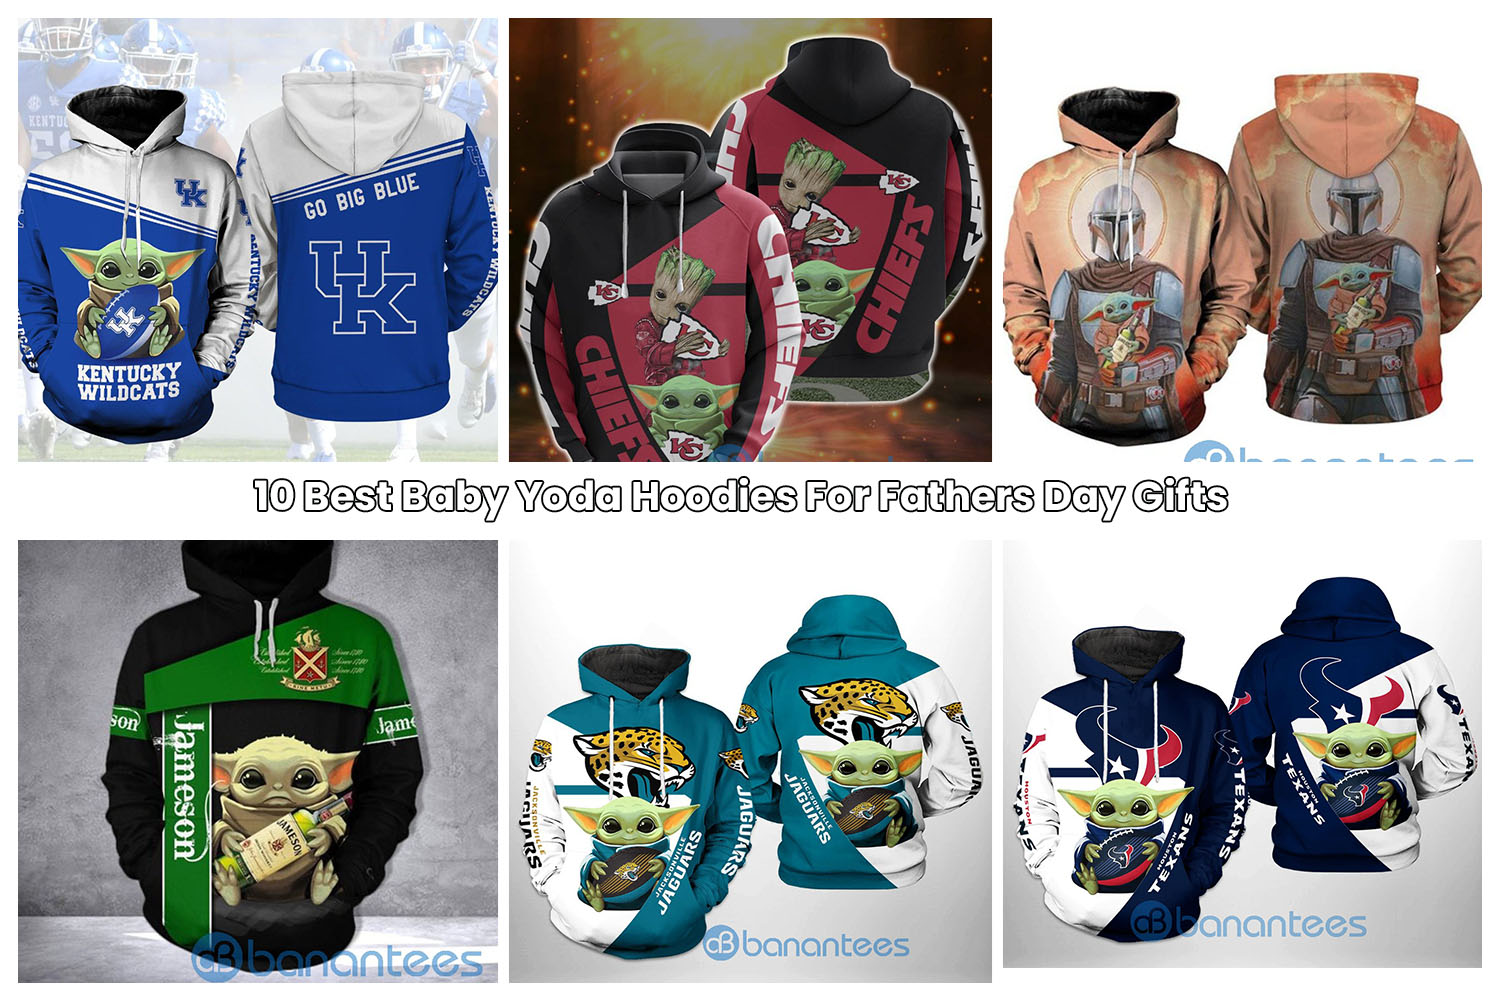 10 Best Baby Yoda Hoodies For Fathers Day Gifts